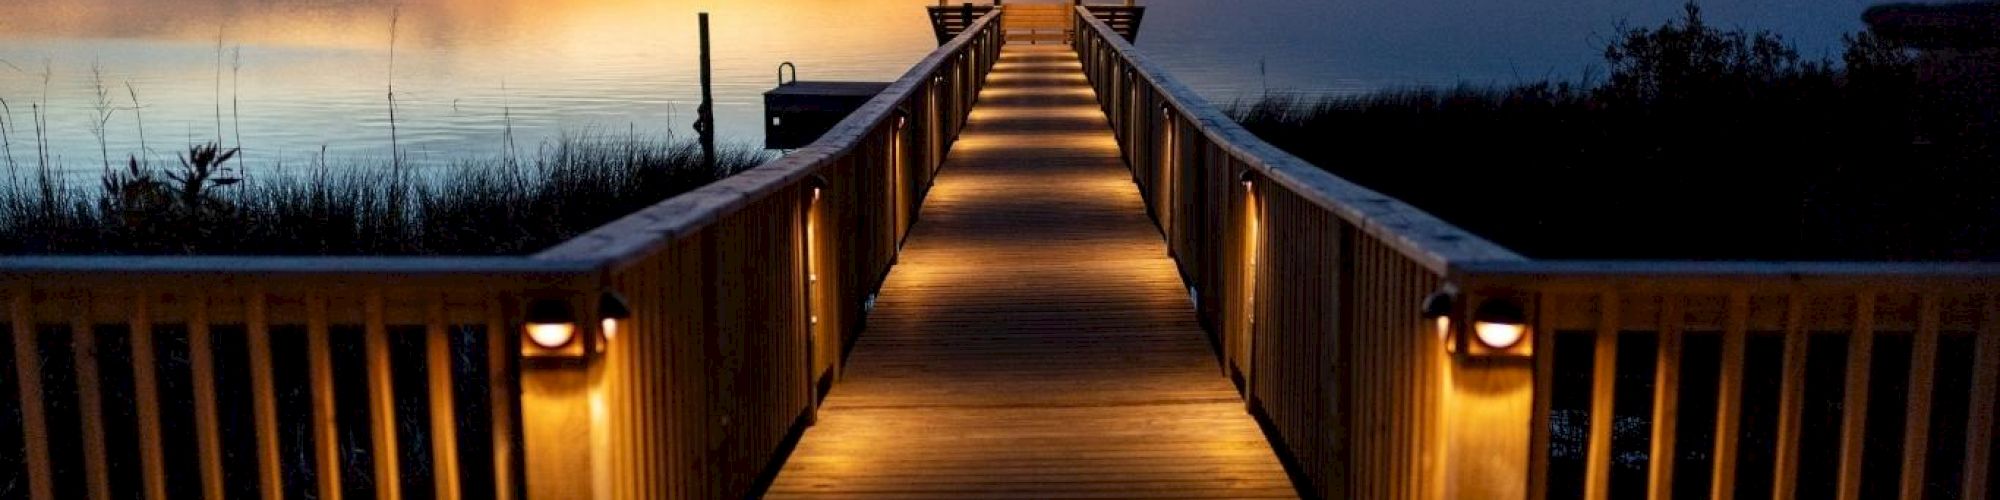 A wooden pathway, illuminated by lights, leads to a pavilion over tranquil water at sunset. The sky displays a beautiful gradient of colors.